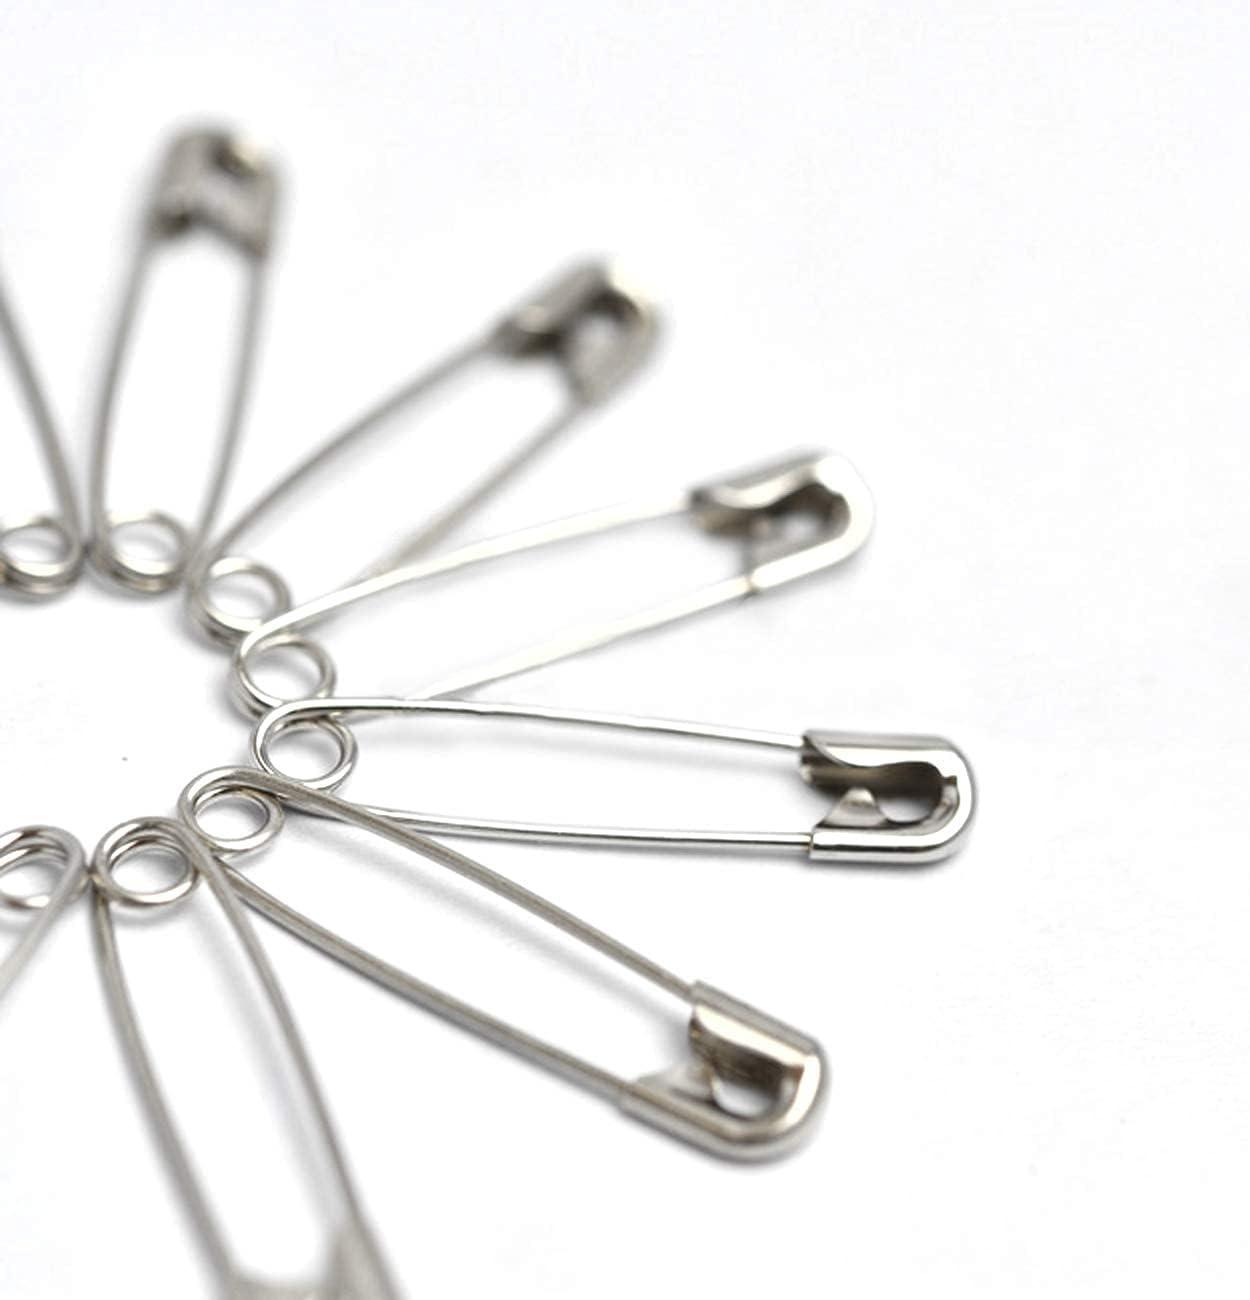  vrupin 500 Pack Safety Pin,1.5Inch/38mm Safety Pins